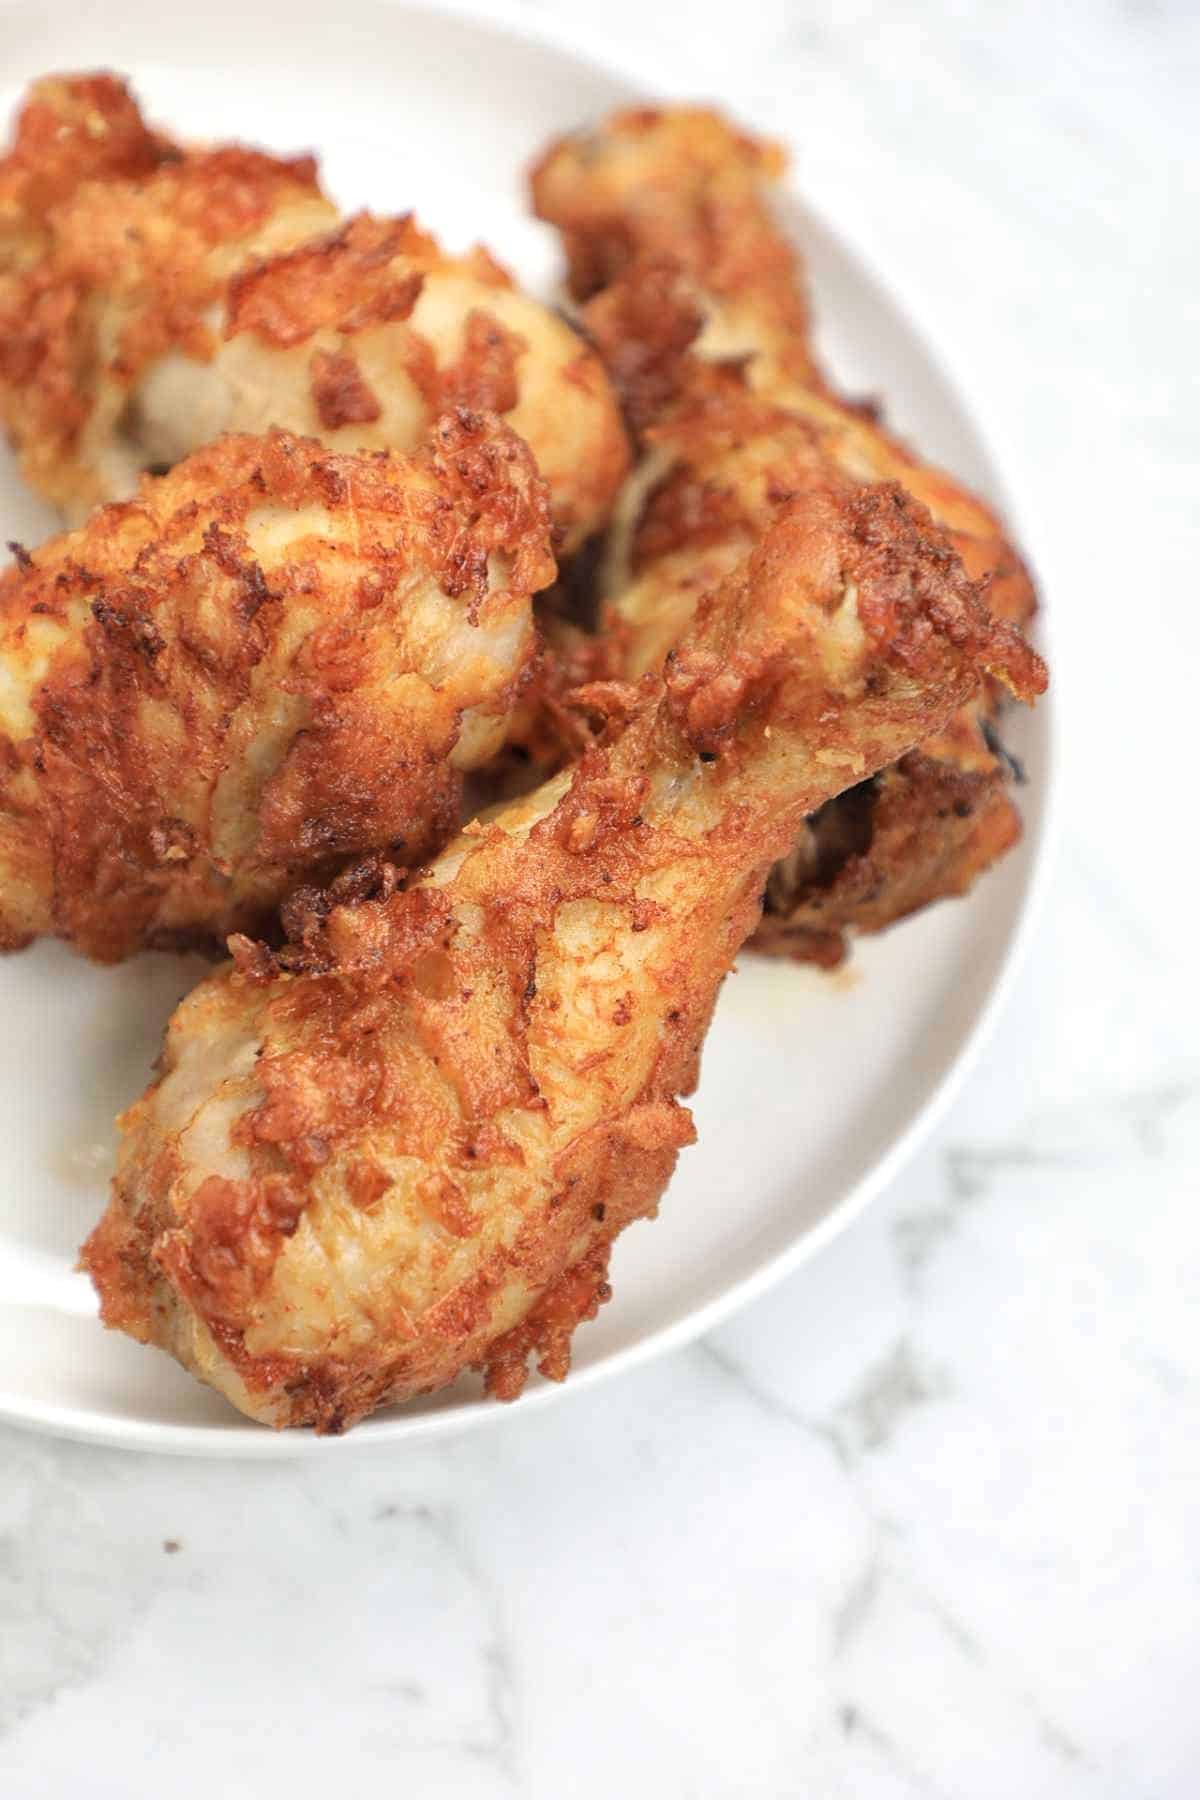 deep fried chicken drumsticks served on a white plate.